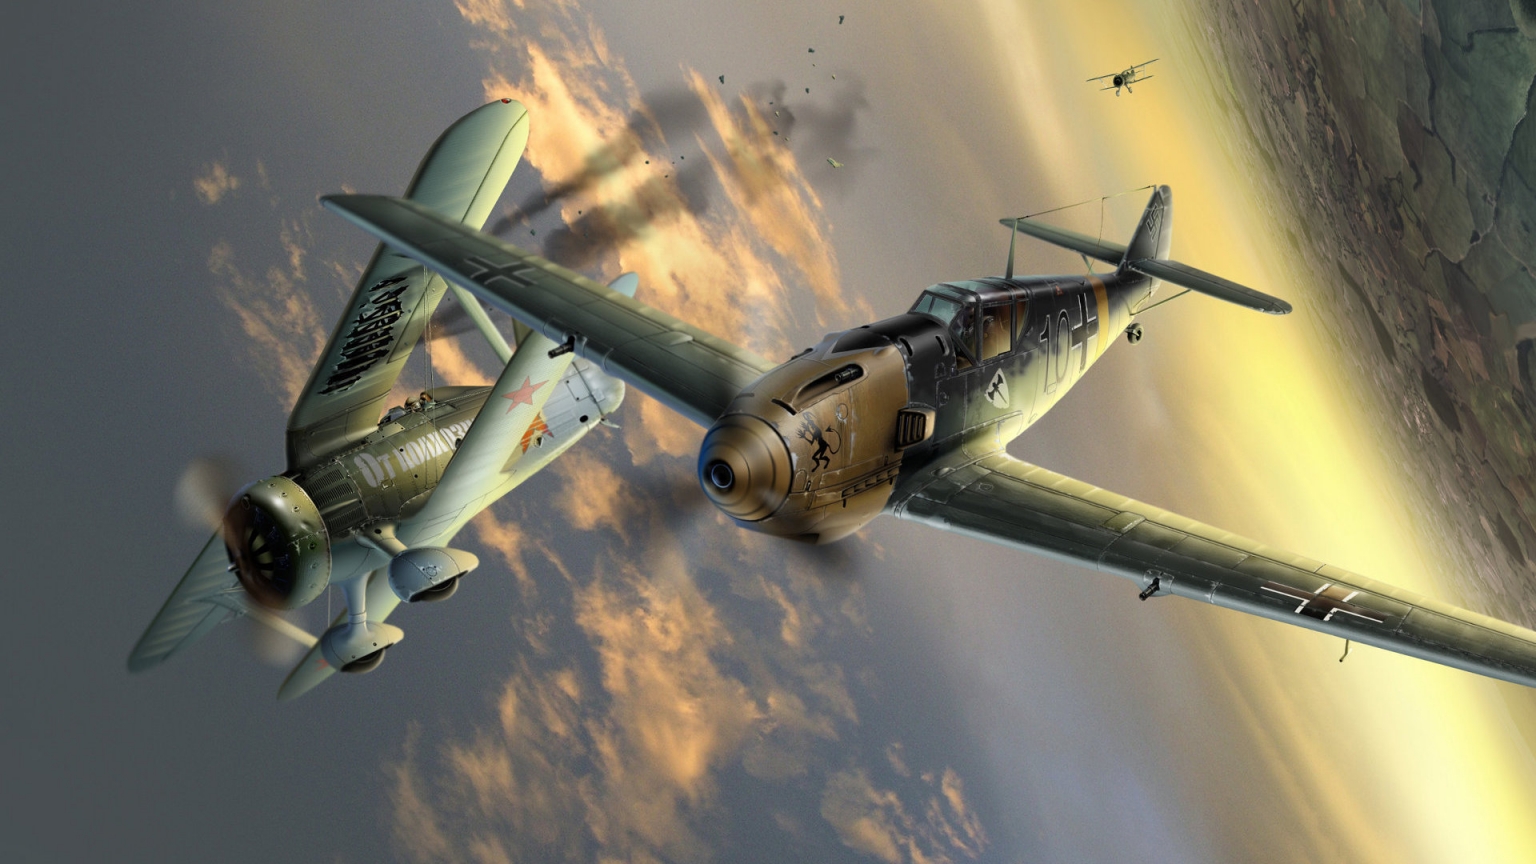 Me 109 War II Fighter Aircraft for 1536 x 864 HDTV resolution